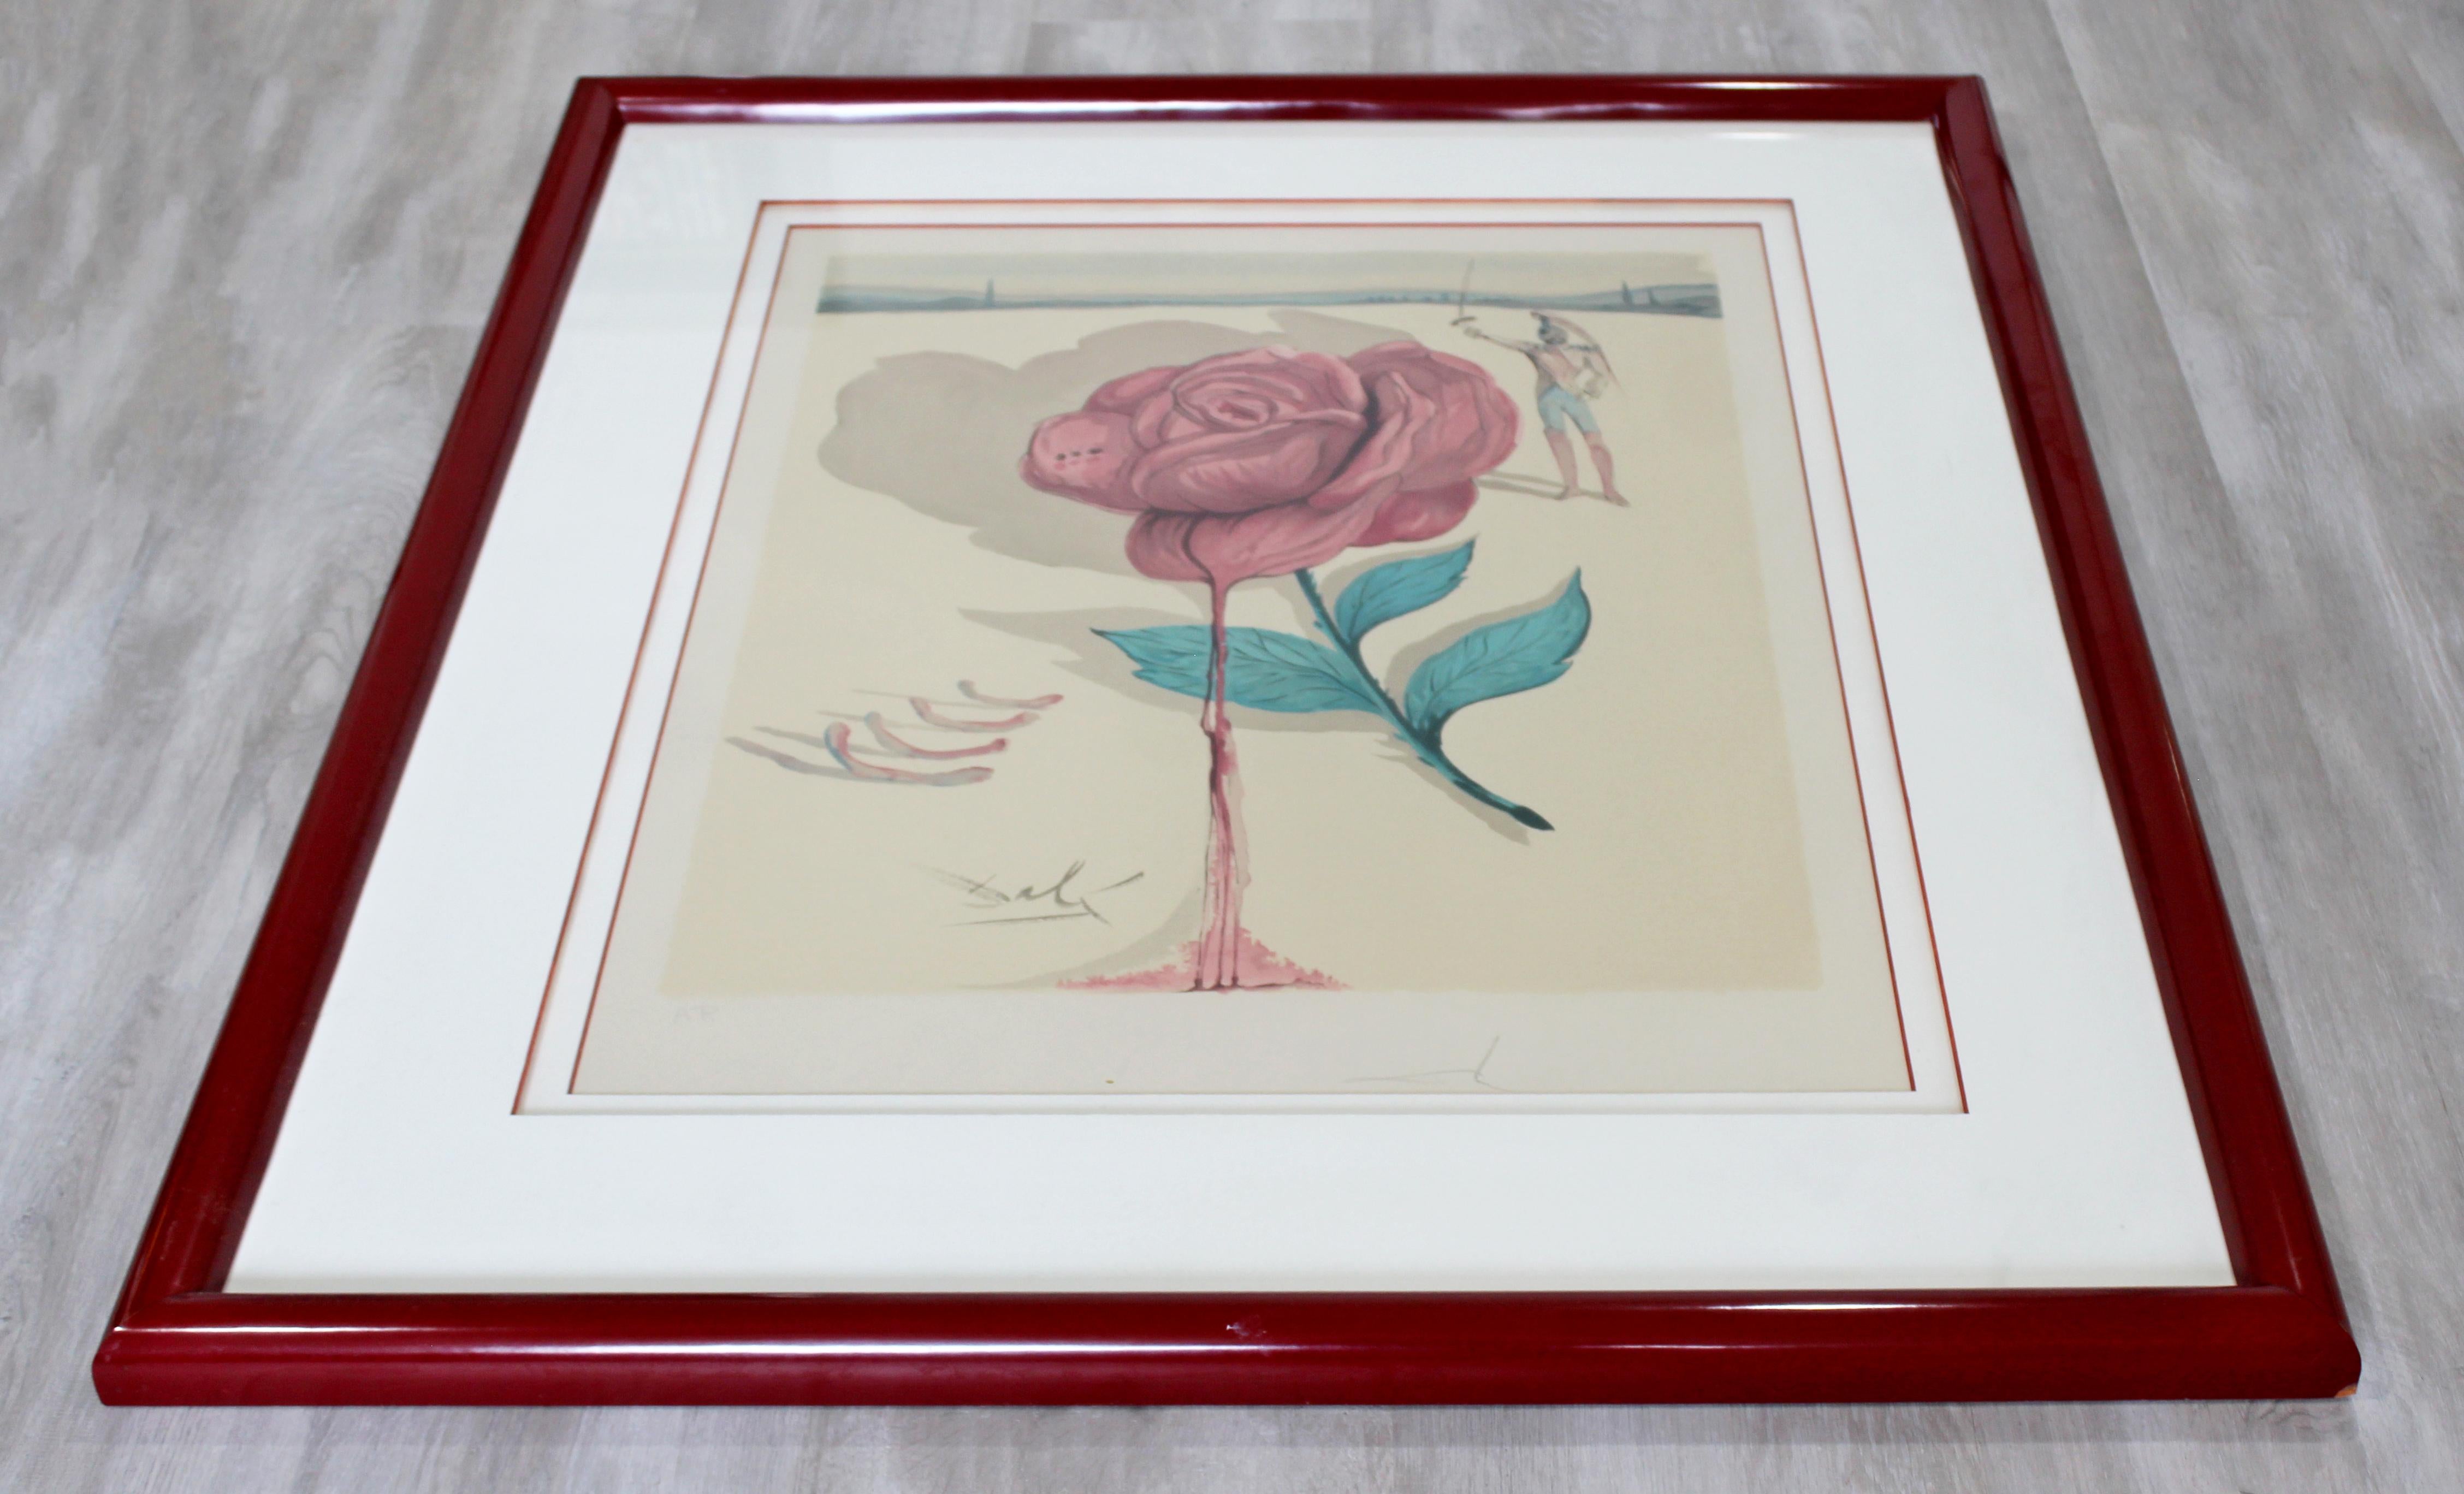 For your consideration is a magnificent, framed A.P. lithograph, 